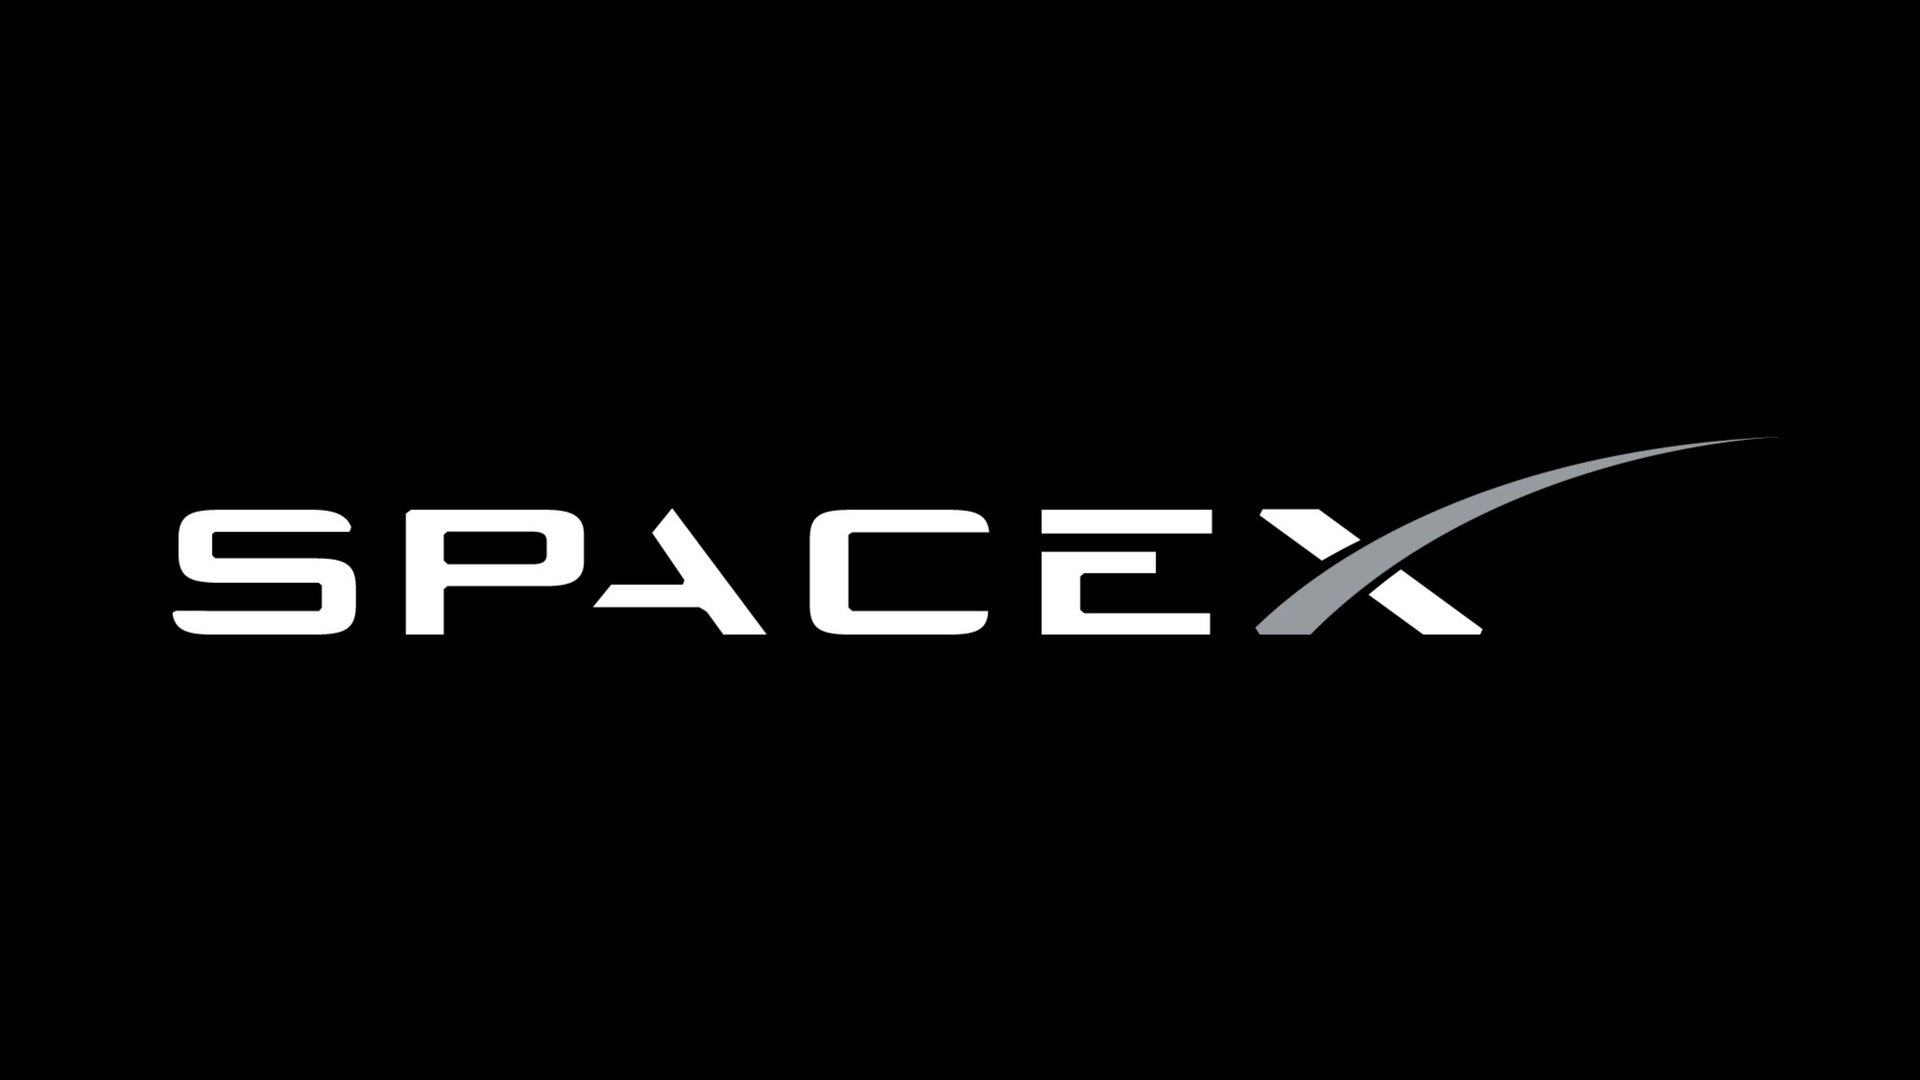 SpaceX makes history